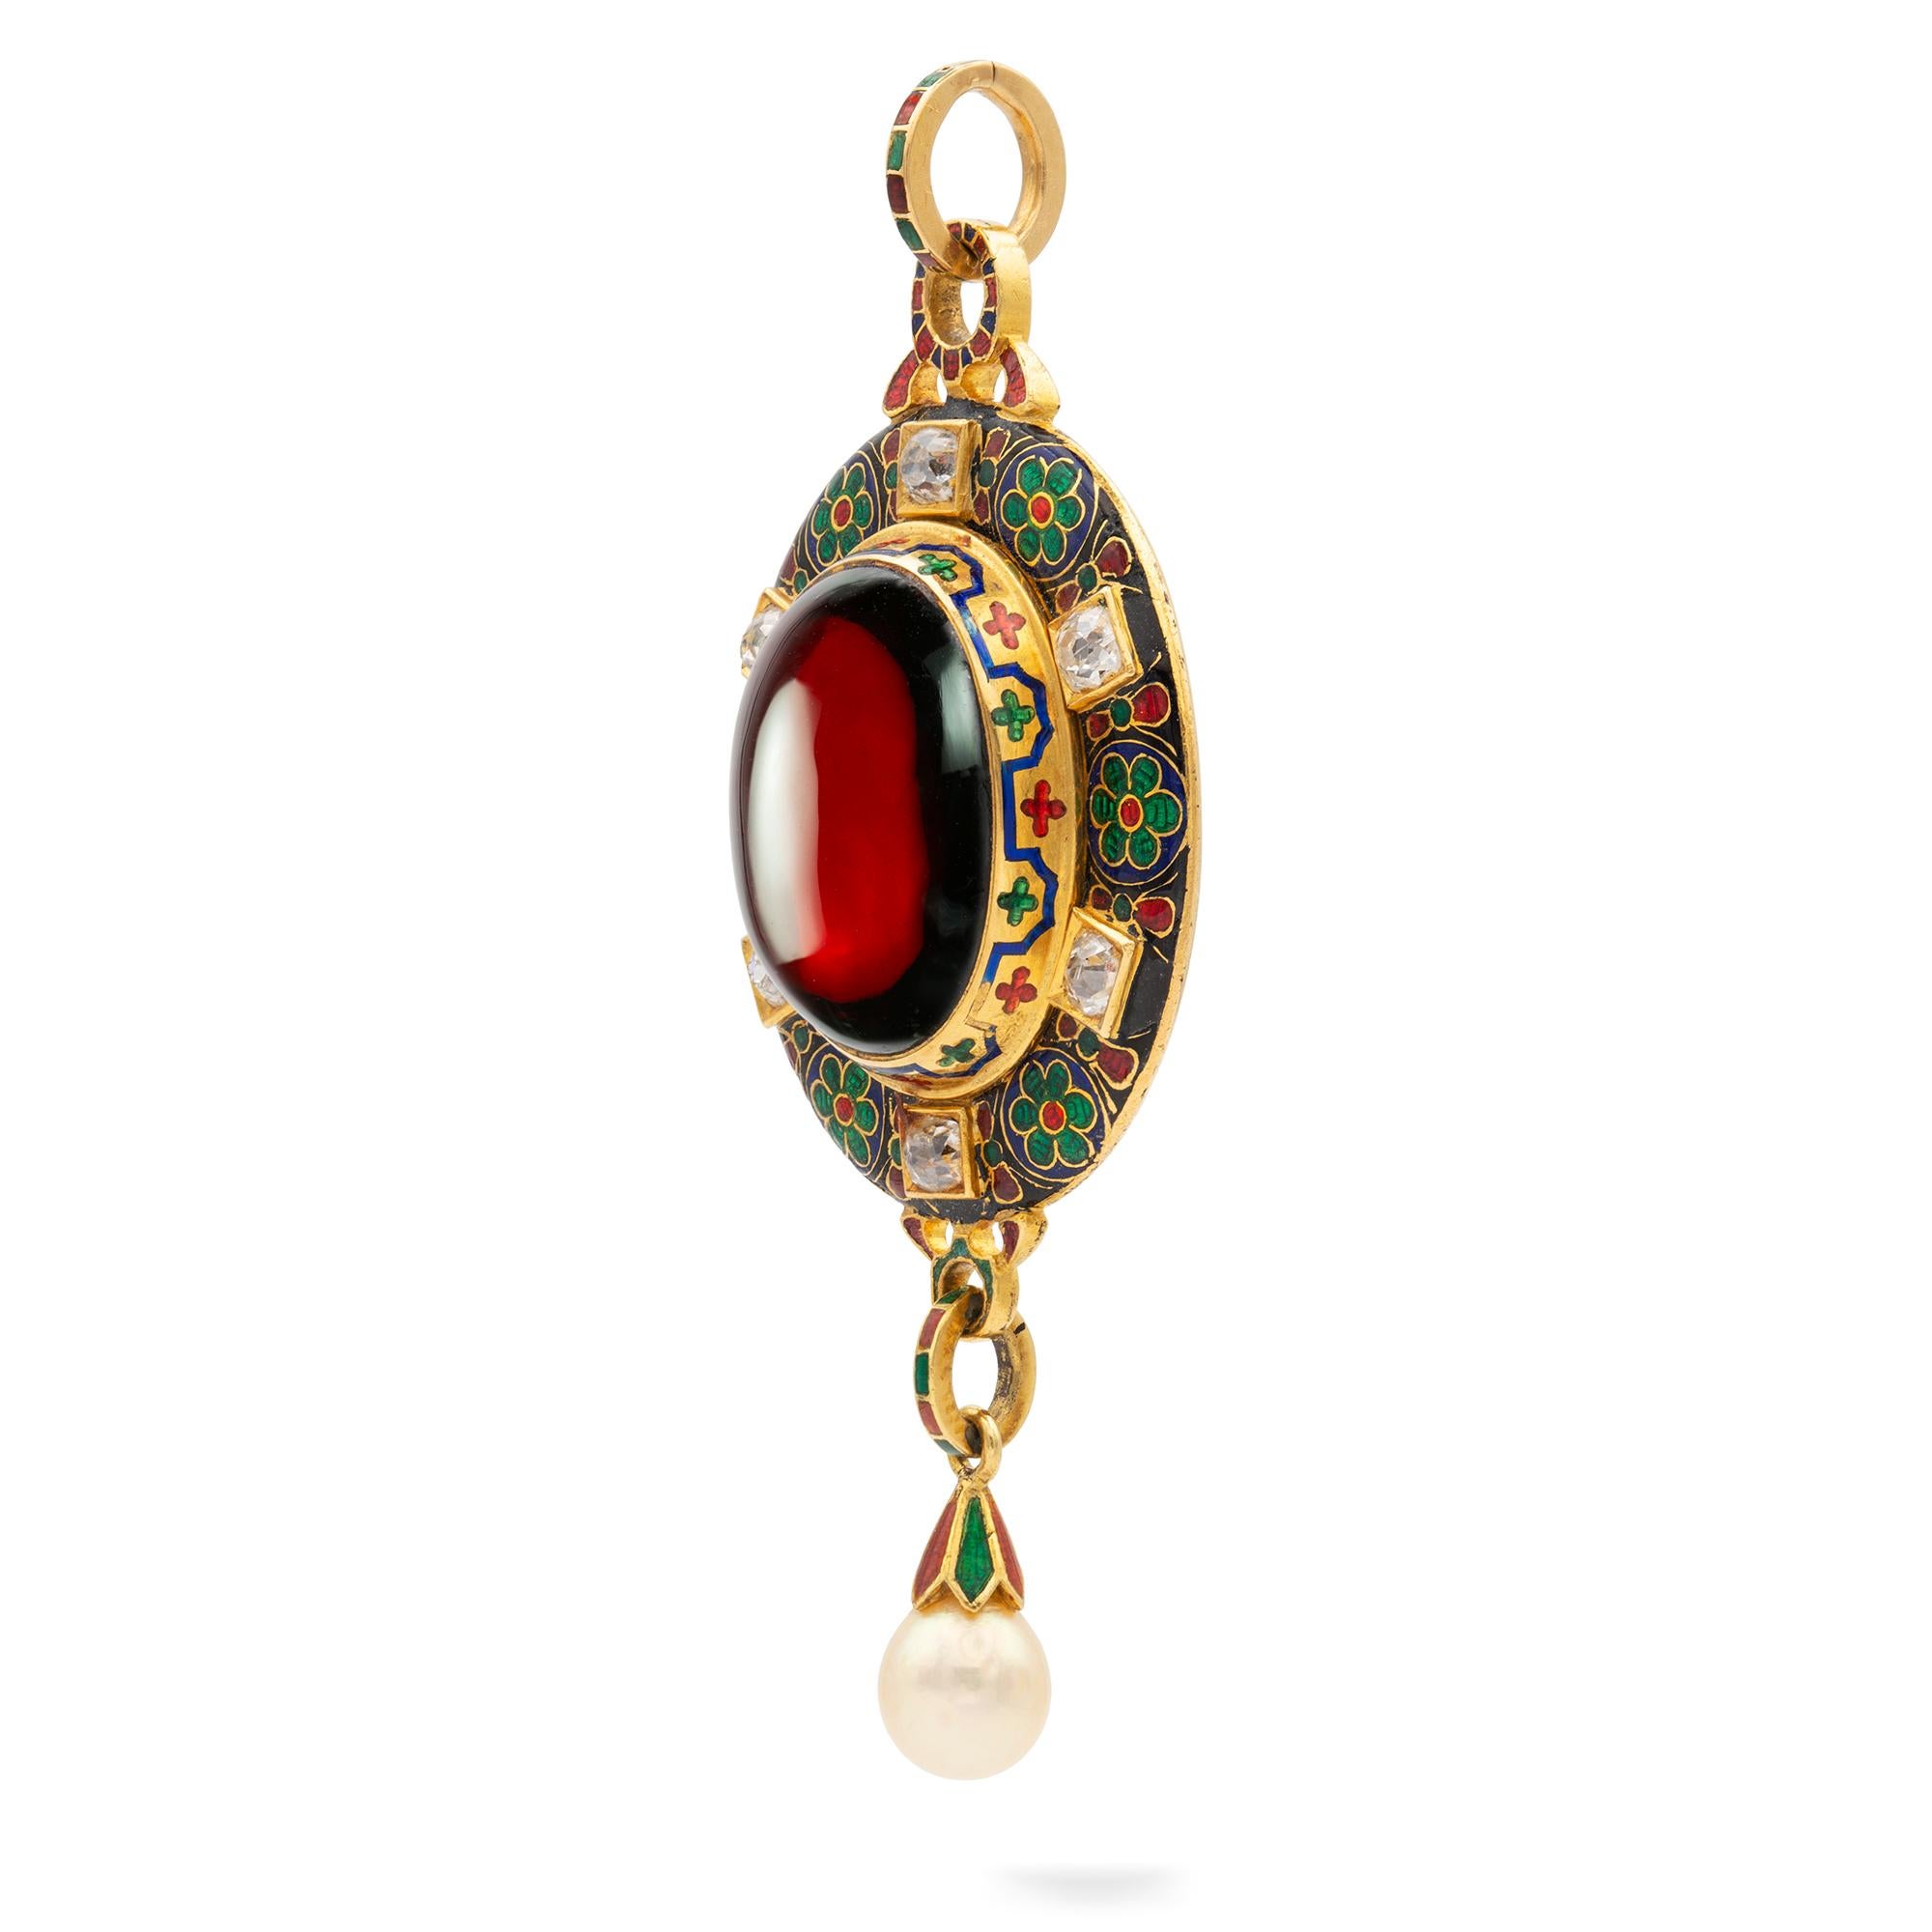 A Victorian Holbeinesque pendant, set to the centre with an oval cabochon-cut garnet measuring 18mm x 13mm, surrounded by six old brilliant-cut diamonds, set within yellow gold square collets alternating with green, blue and red enamel floral motif,